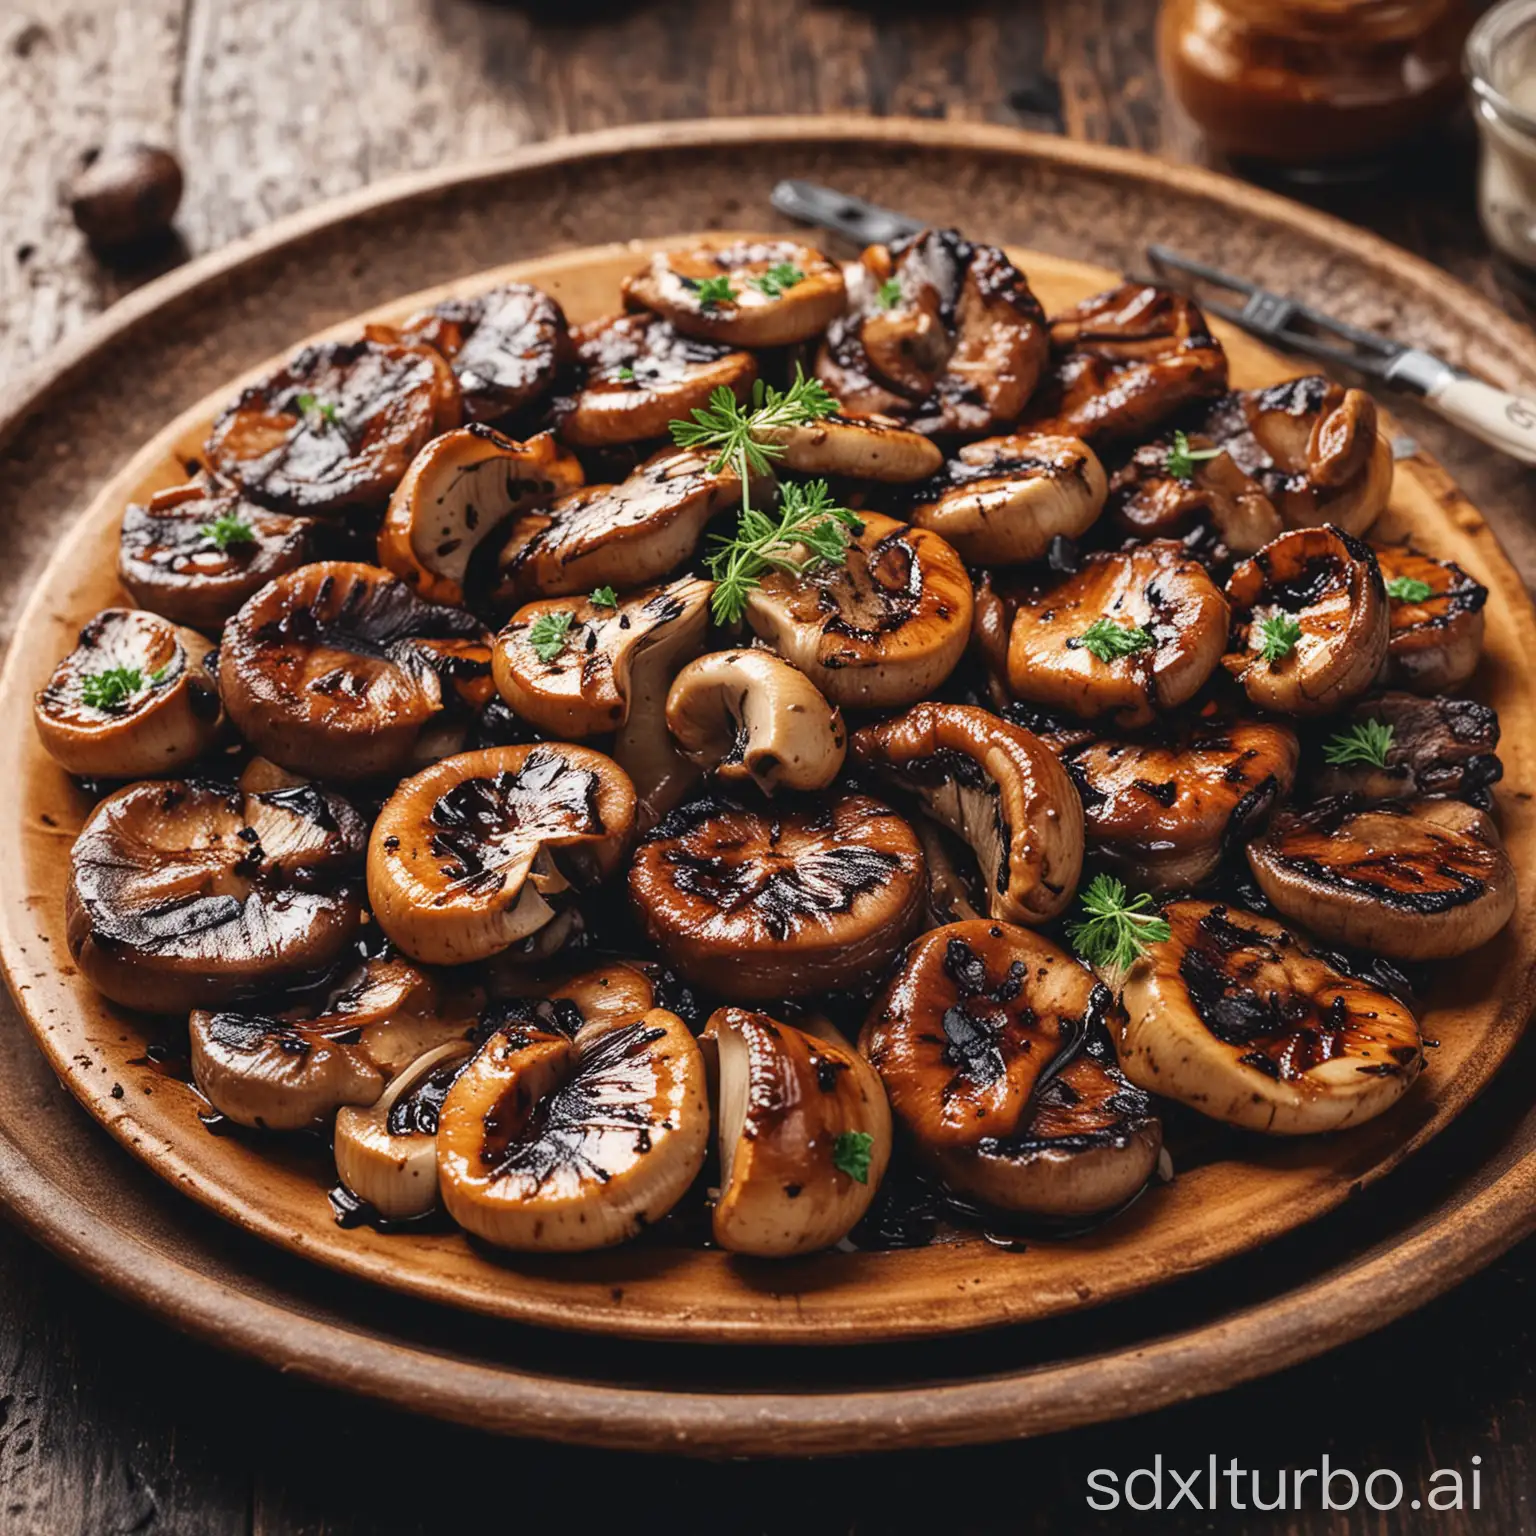 A plate of grilled mushroom,BBQ,mouthwatering and enticing presentation, Very real colors and comfortable light.Looks like it's in a fancy restaurant